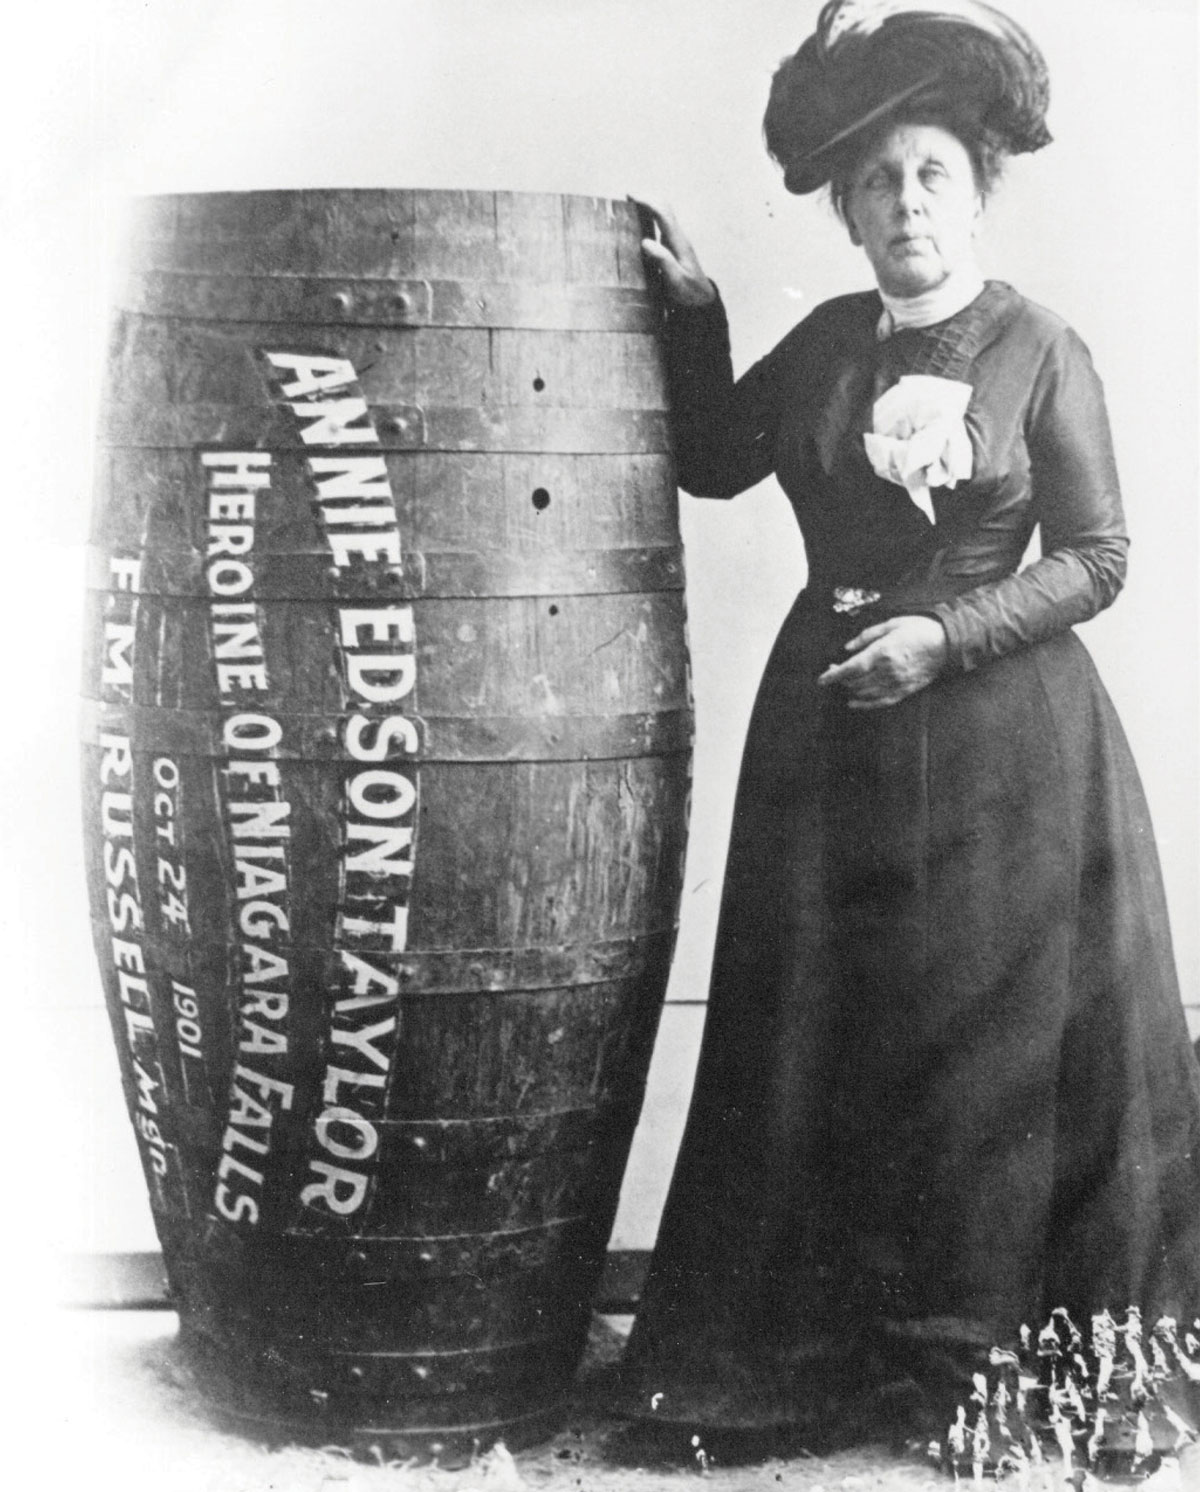 A 1901 photograph of Annie Edson Taylor with a barrel, the first person to successfully make it over Niagara Falls.  